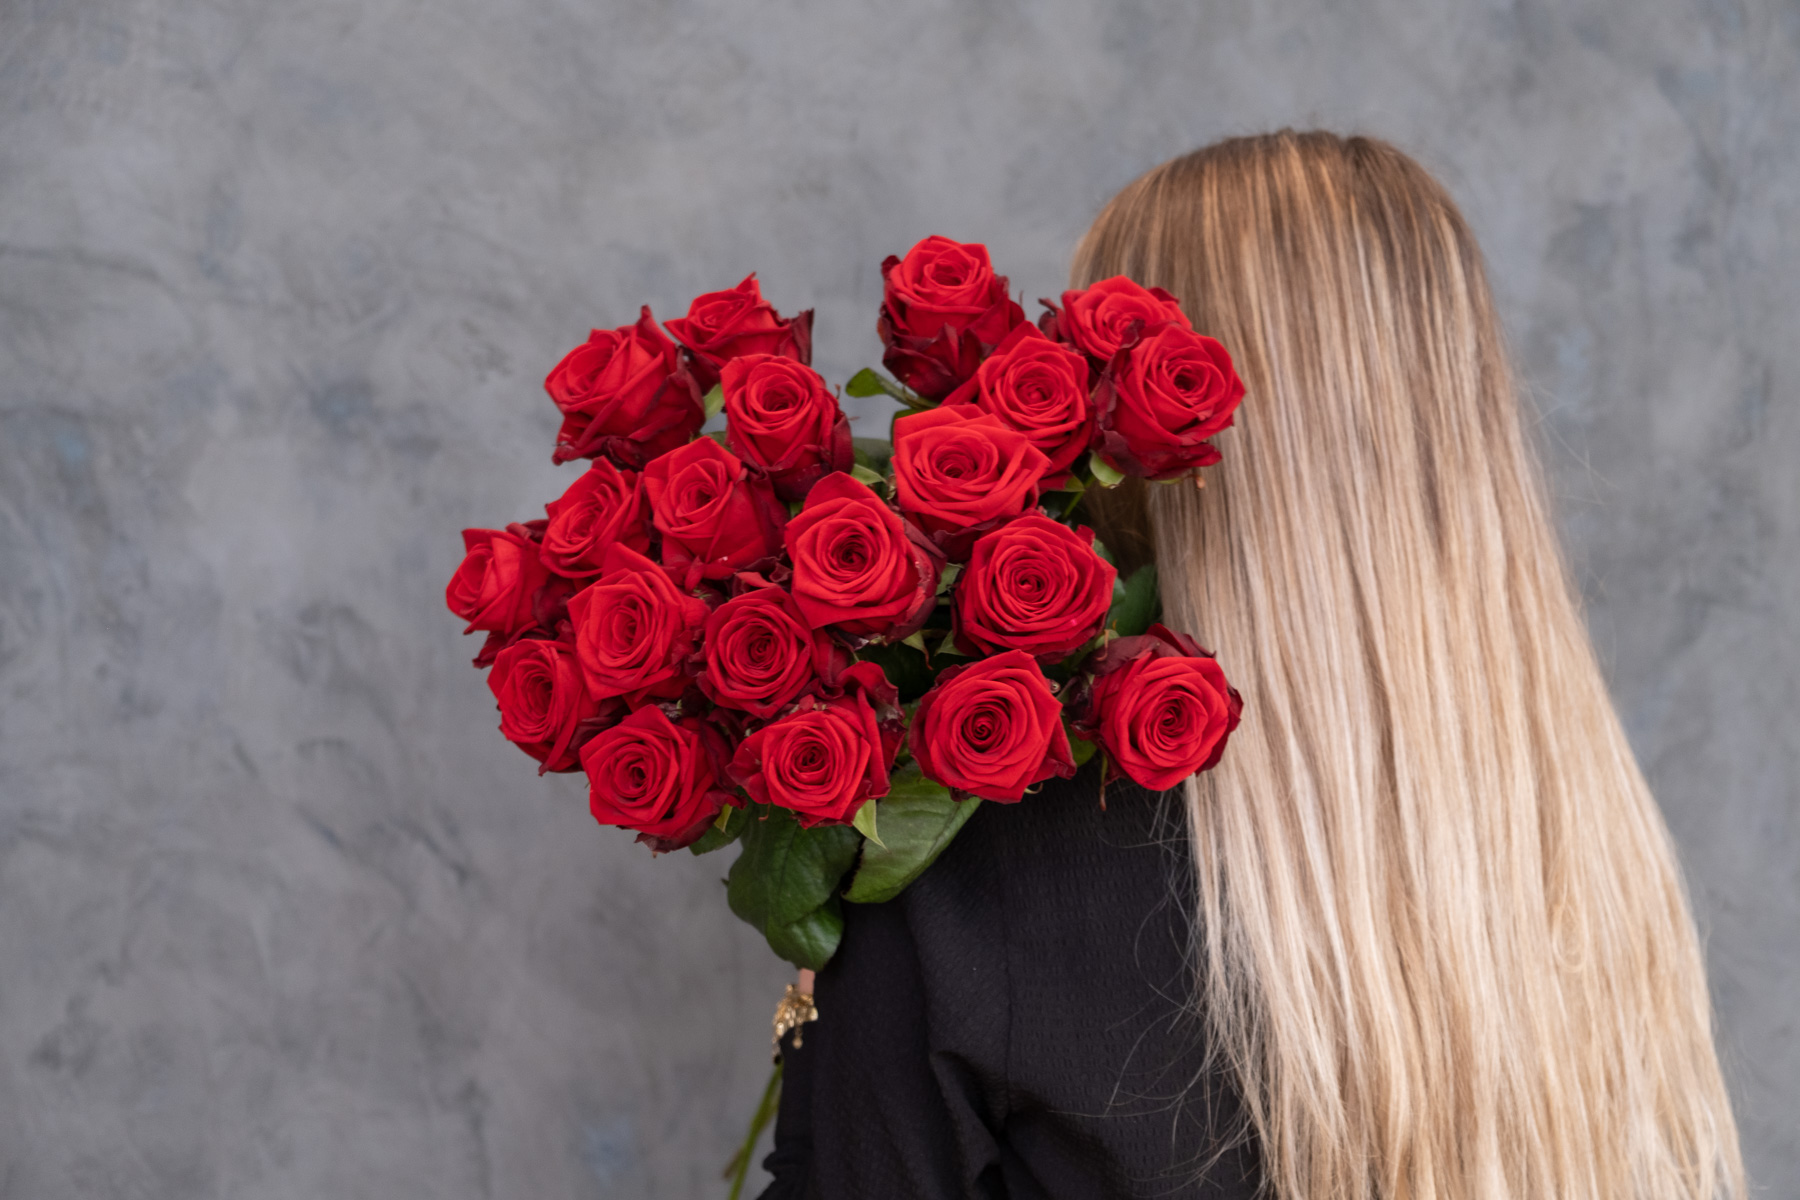 Why red roses for Valentine's Day?